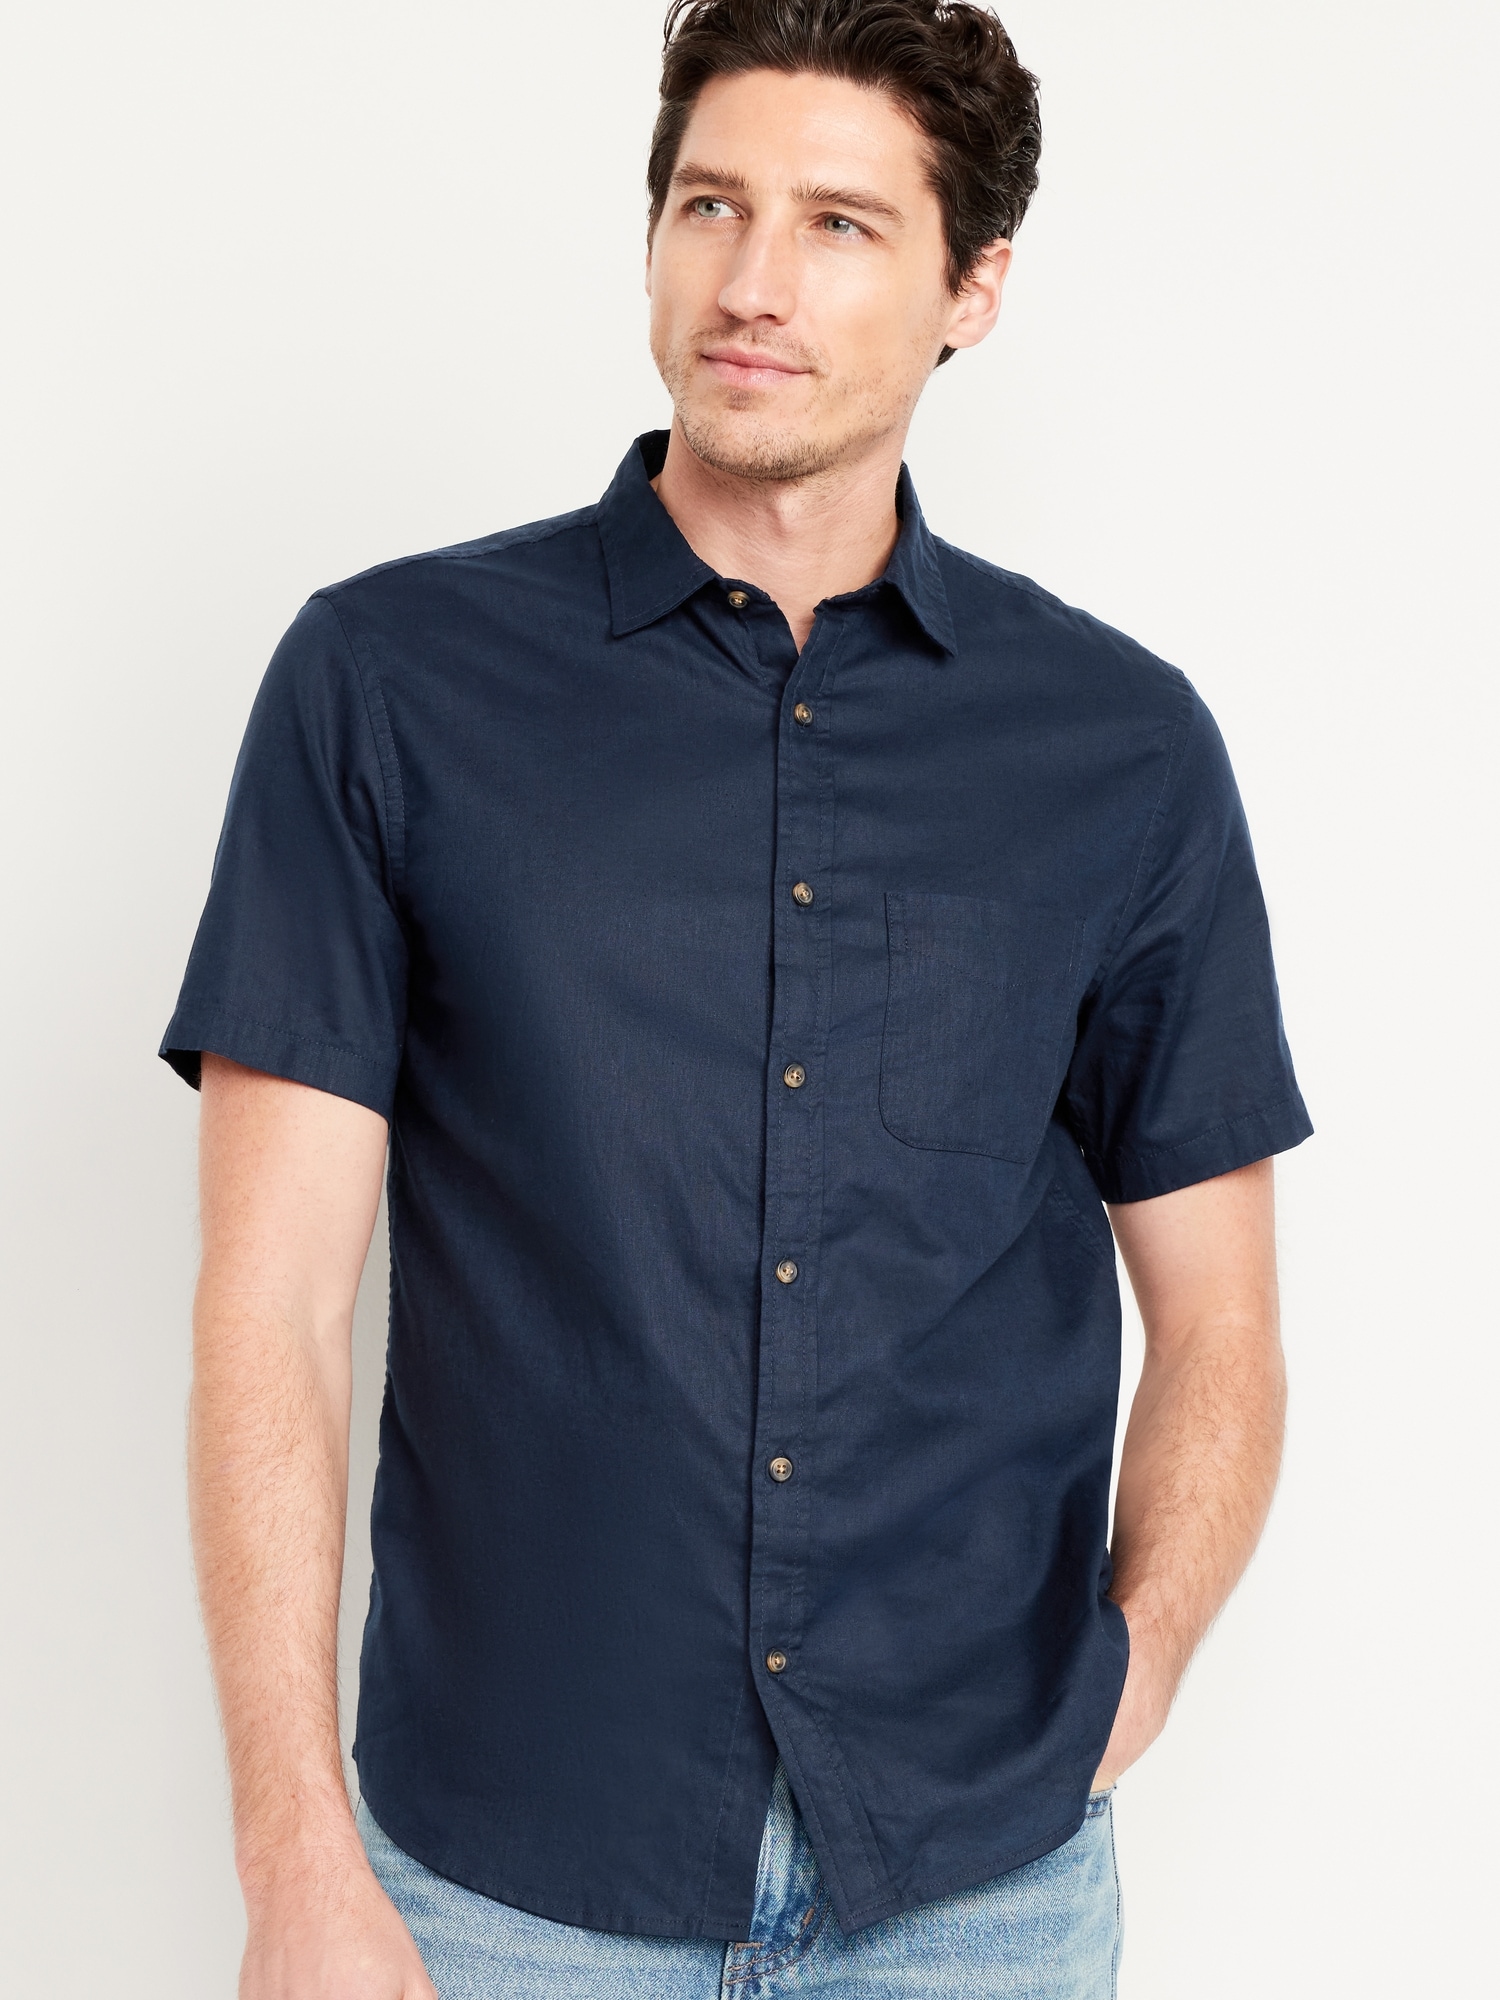 Men's Cotton Shirts  Old Navy Canada Canada